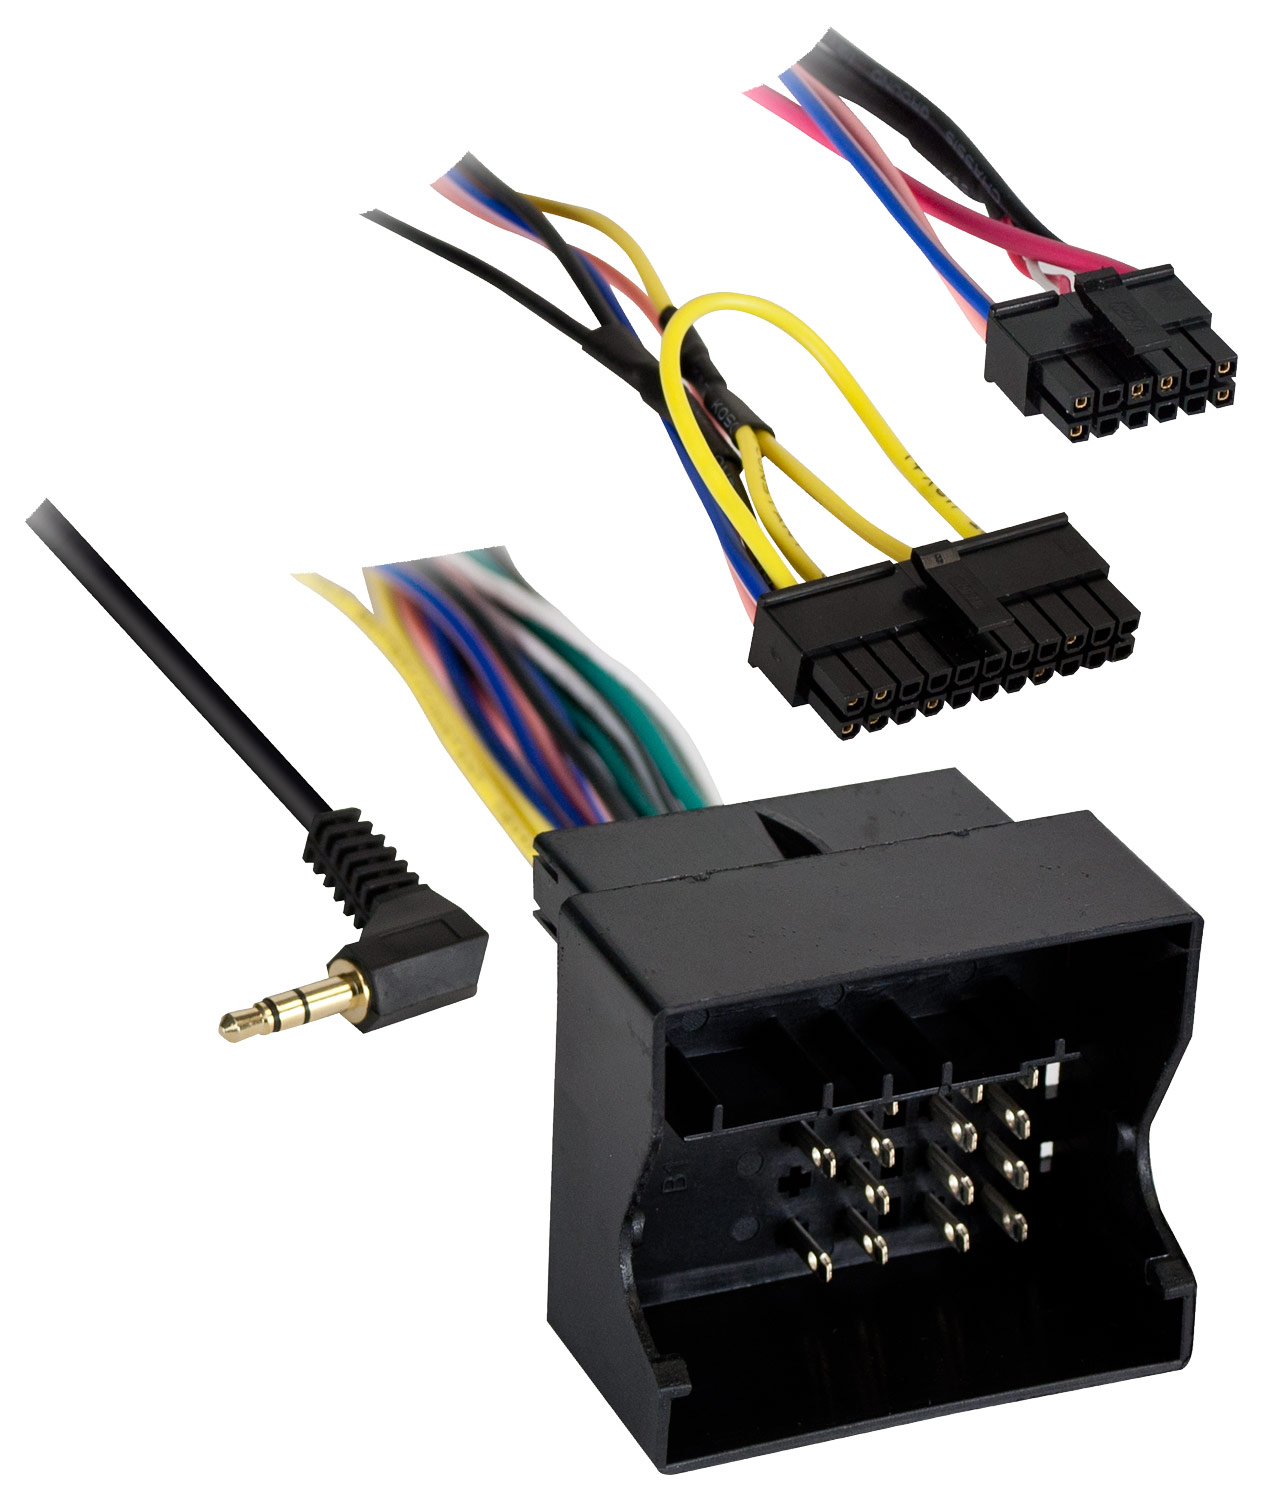 Metra - Axxess ADBOX Data Interface Harness for Select Volkswagen Vehicles - Black was $16.99 now $12.74 (25.0% off)